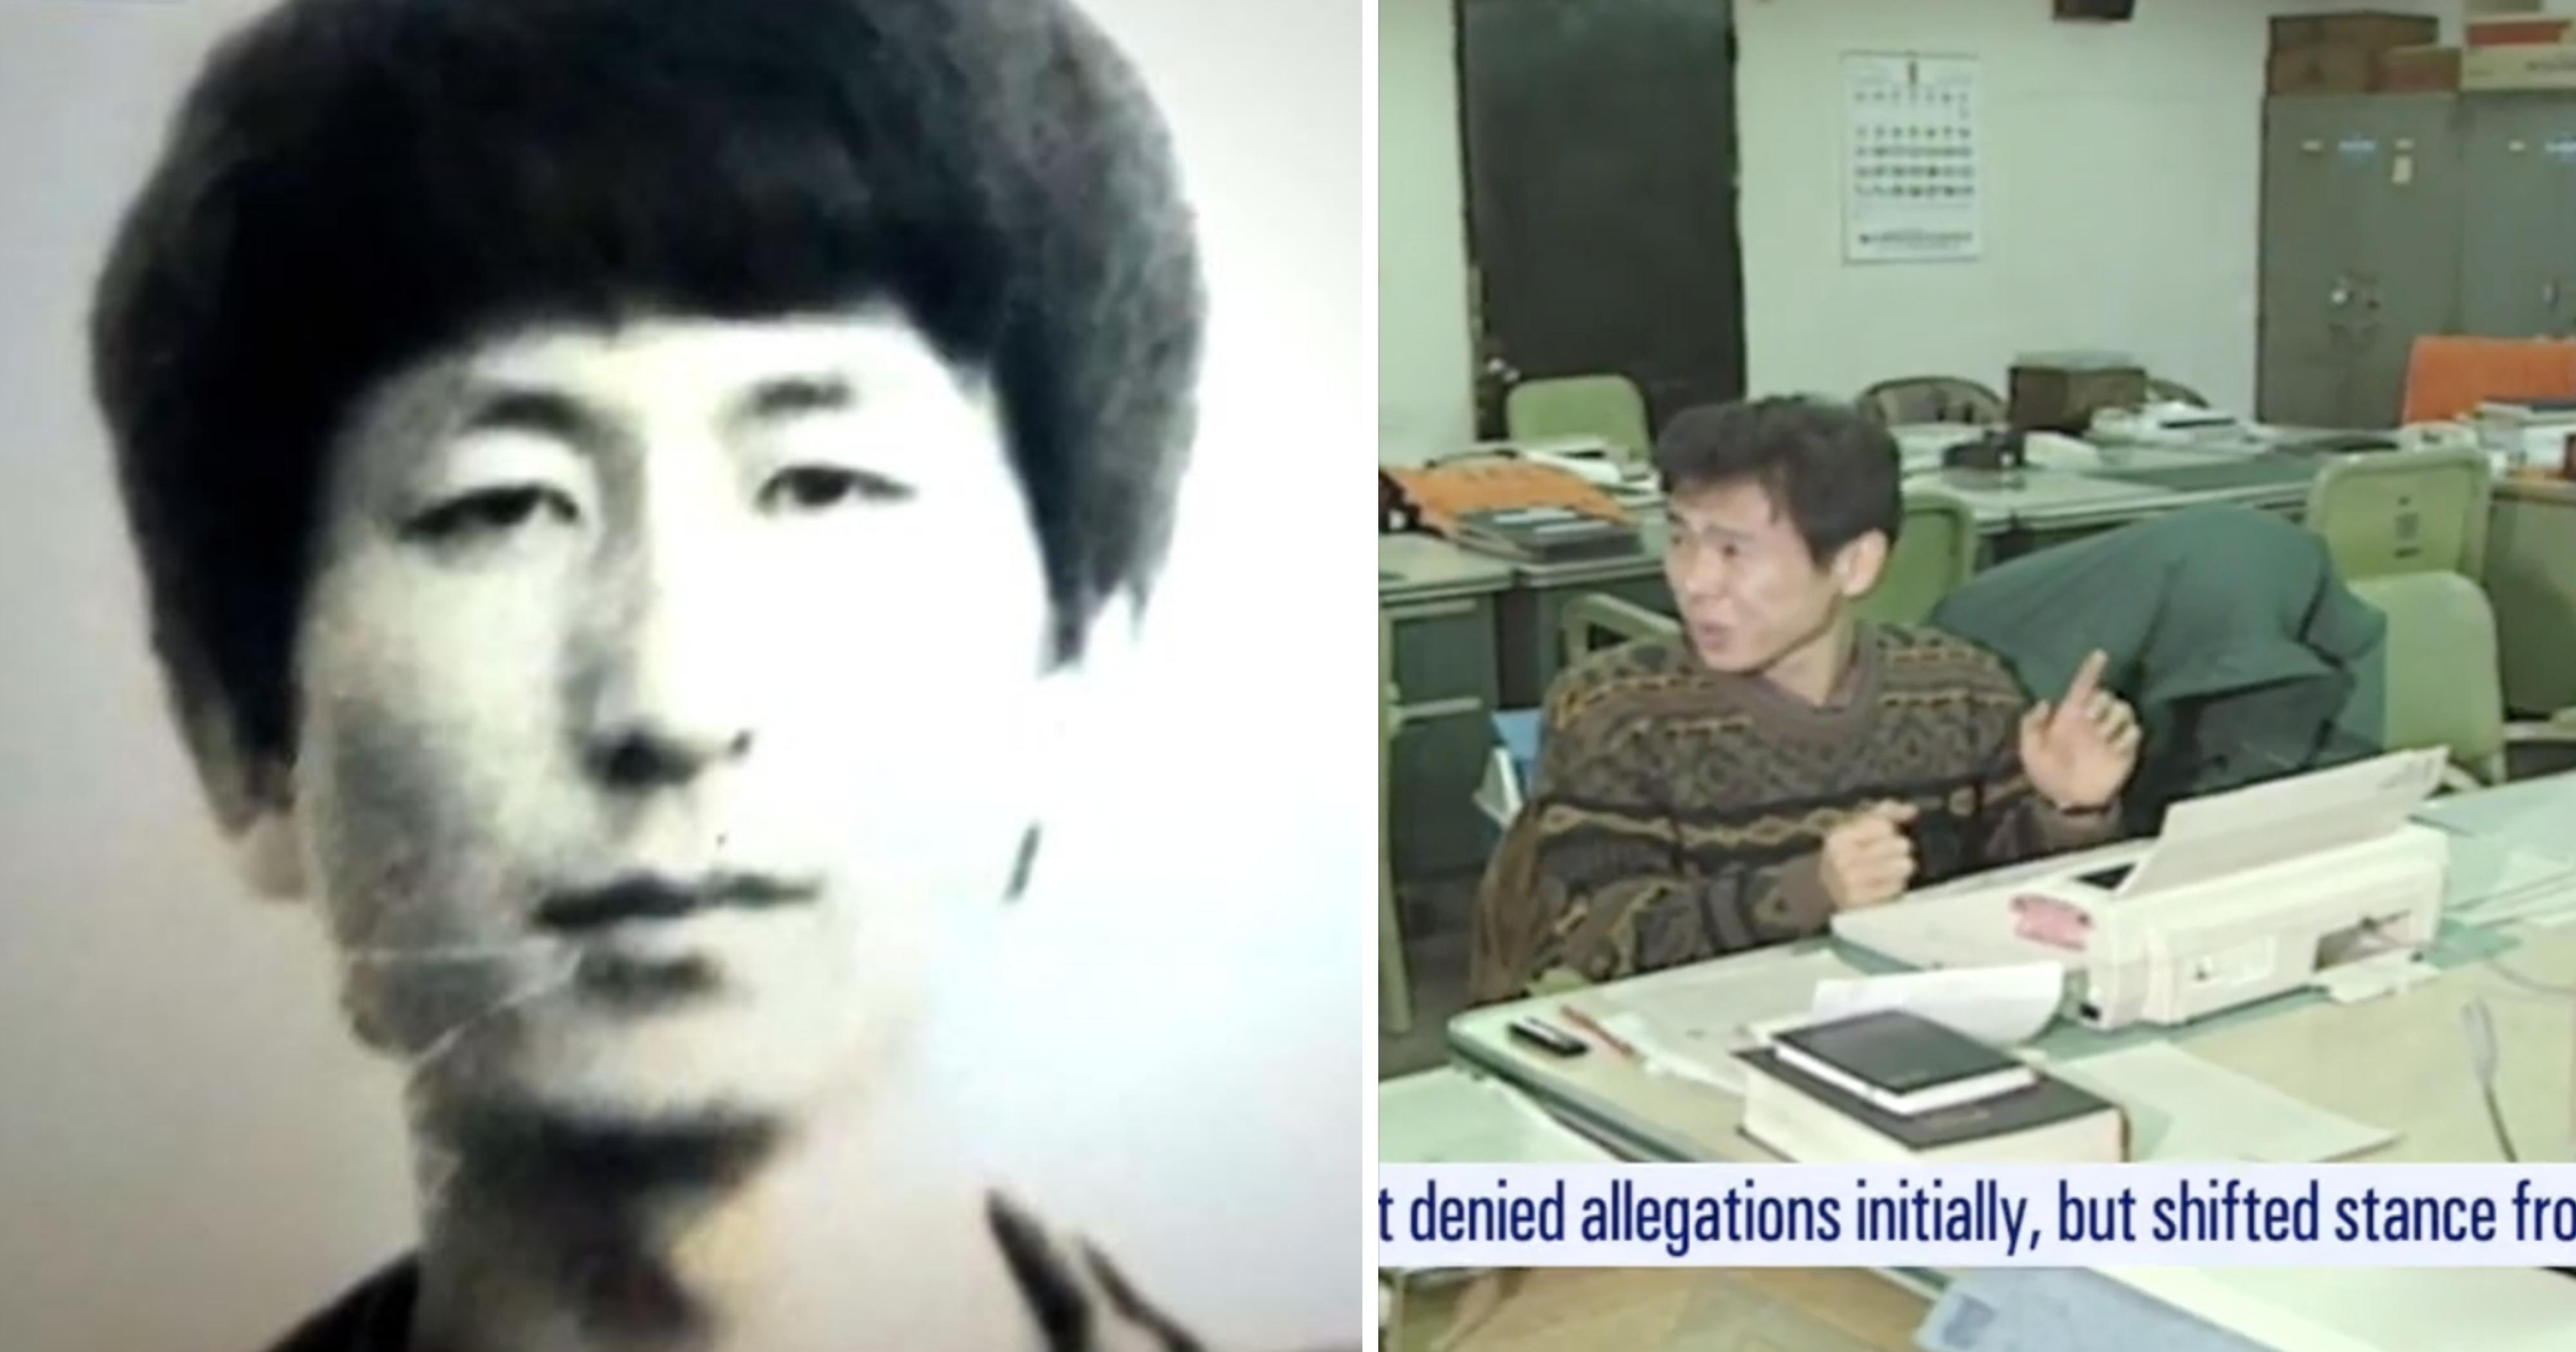 Korean man, 52, confesses to 14 murders & 30 sexual assaults, 30 years  after he committed them  - News from Singapore, Asia and  around the world